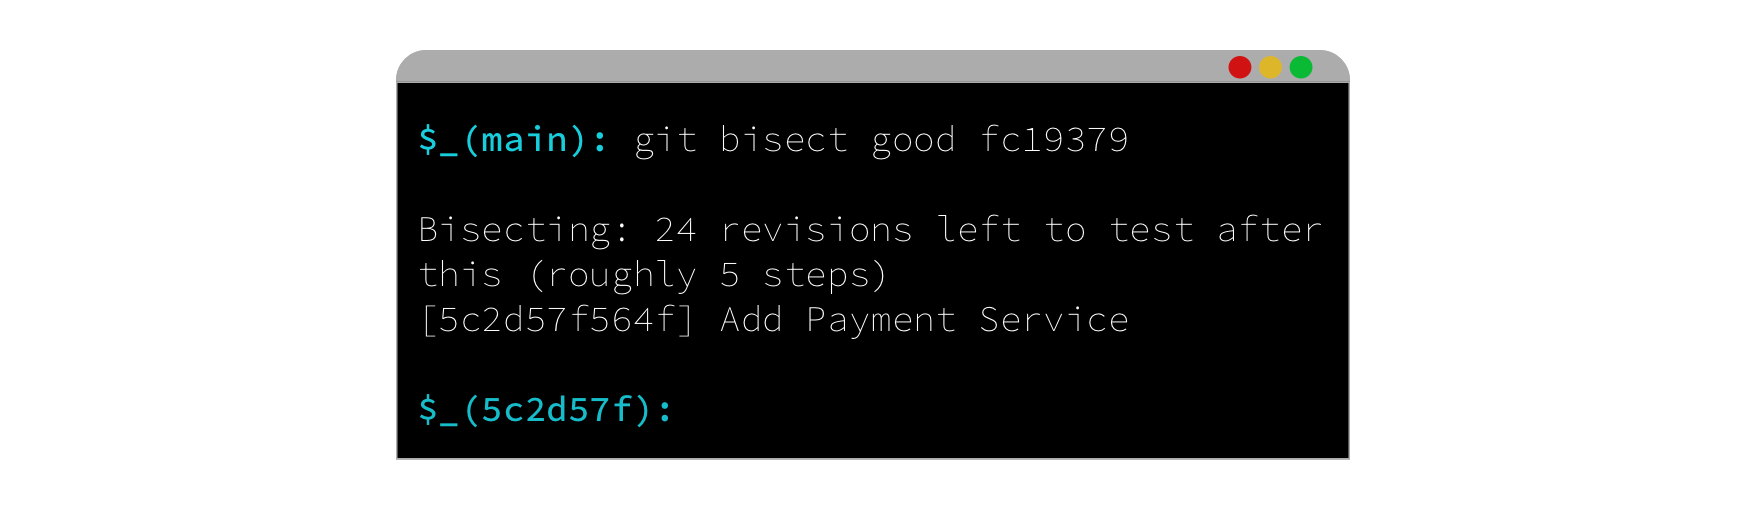 cli_bisect_good.png